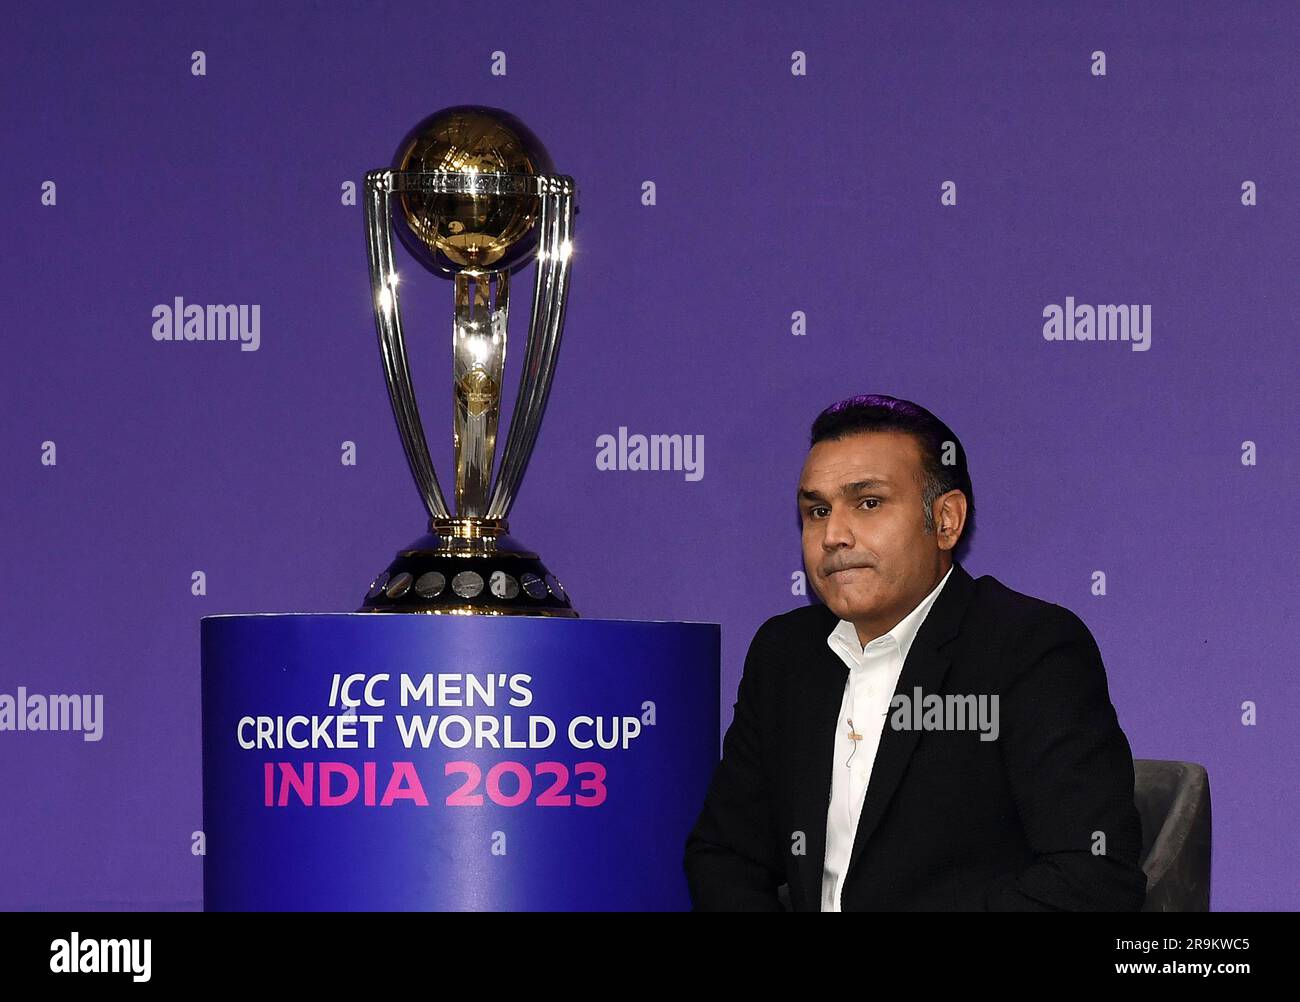 Mumbai, India. 27th June, 2023. Former Indian cricketer Virender Sehwag is seen sitting next to the world cup trophy during the match schedule announcement press conference of men's cricket world cup 2023 in Mumbai. India will be hosting the men's cricket world cup beginning from 5th October 2023. (Photo by Ashish Vaishnav/SOPA Images/Sipa USA) Credit: Sipa USA/Alamy Live News Stock Photo